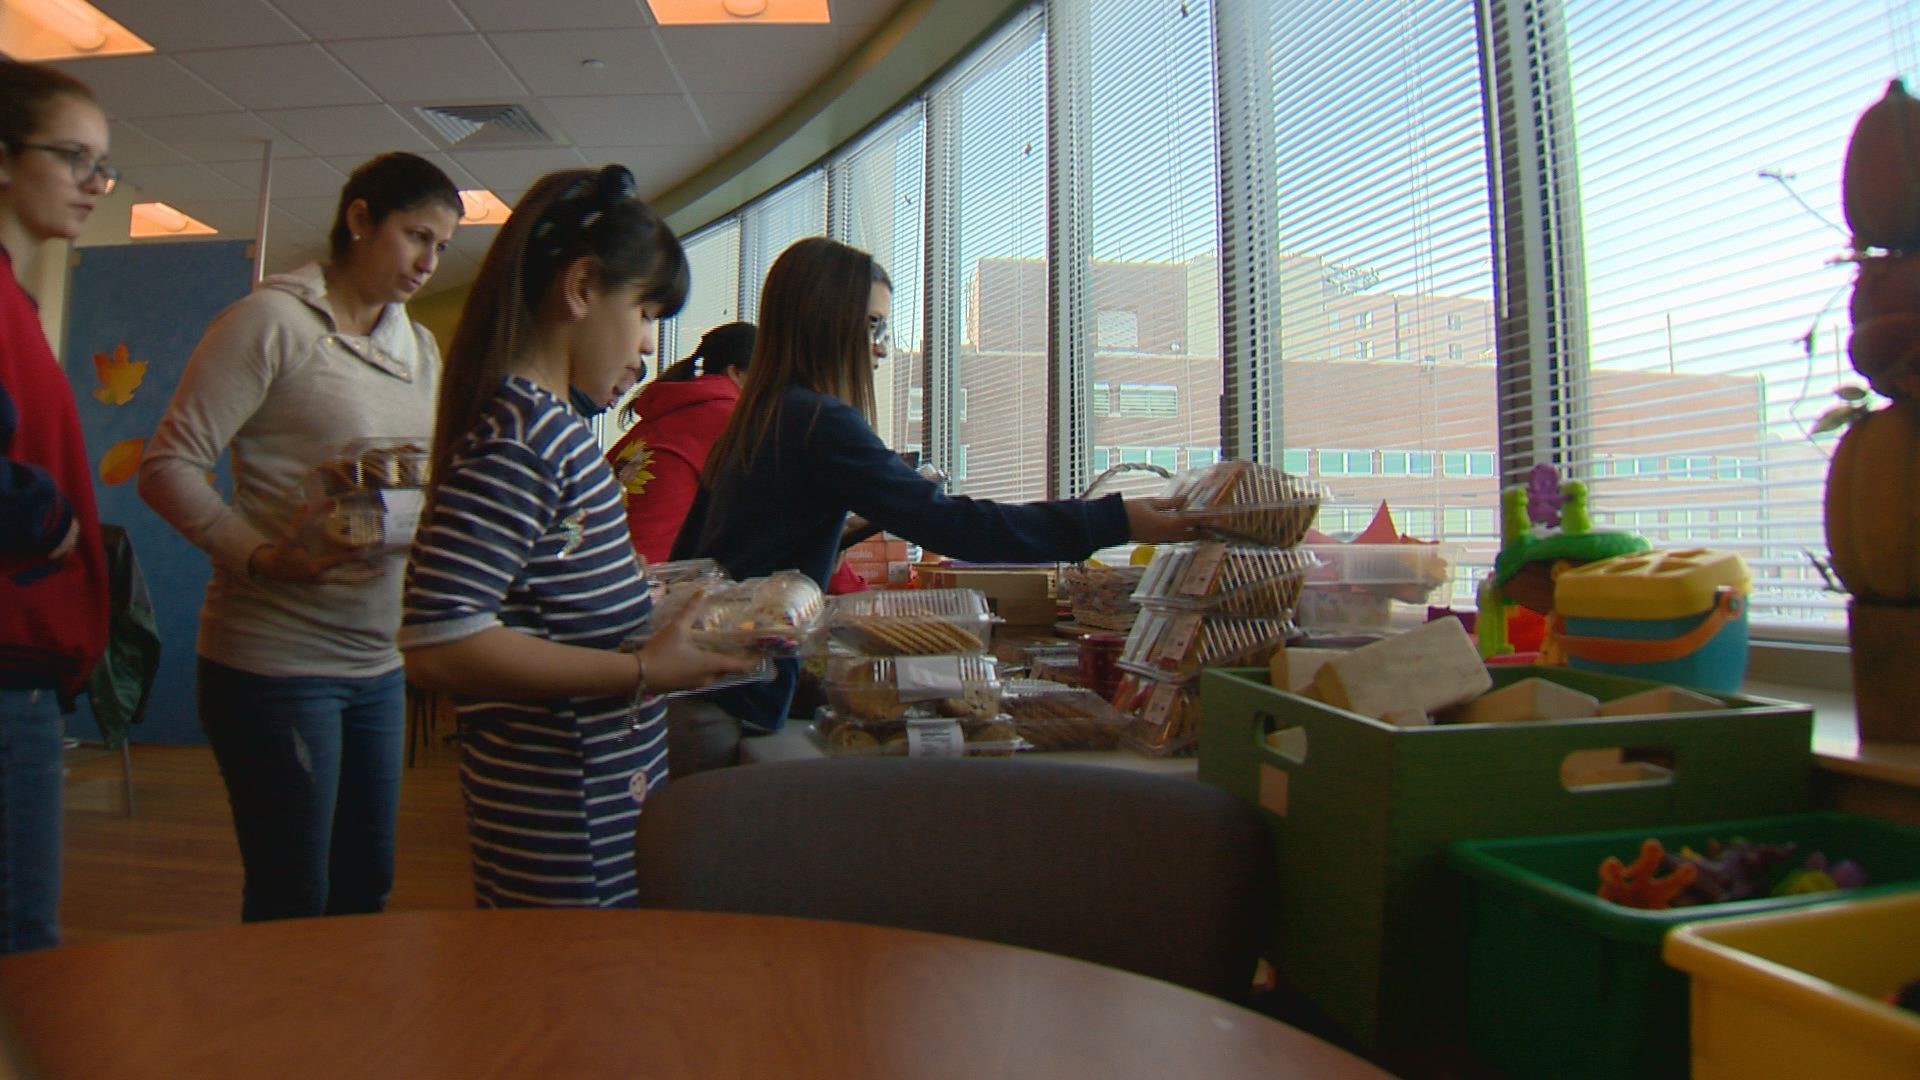 The Kyle Wood Foundation has the tradition of delivering Thanksgiving meals and desserts to families spending the holiday caring for their children in the hospital.